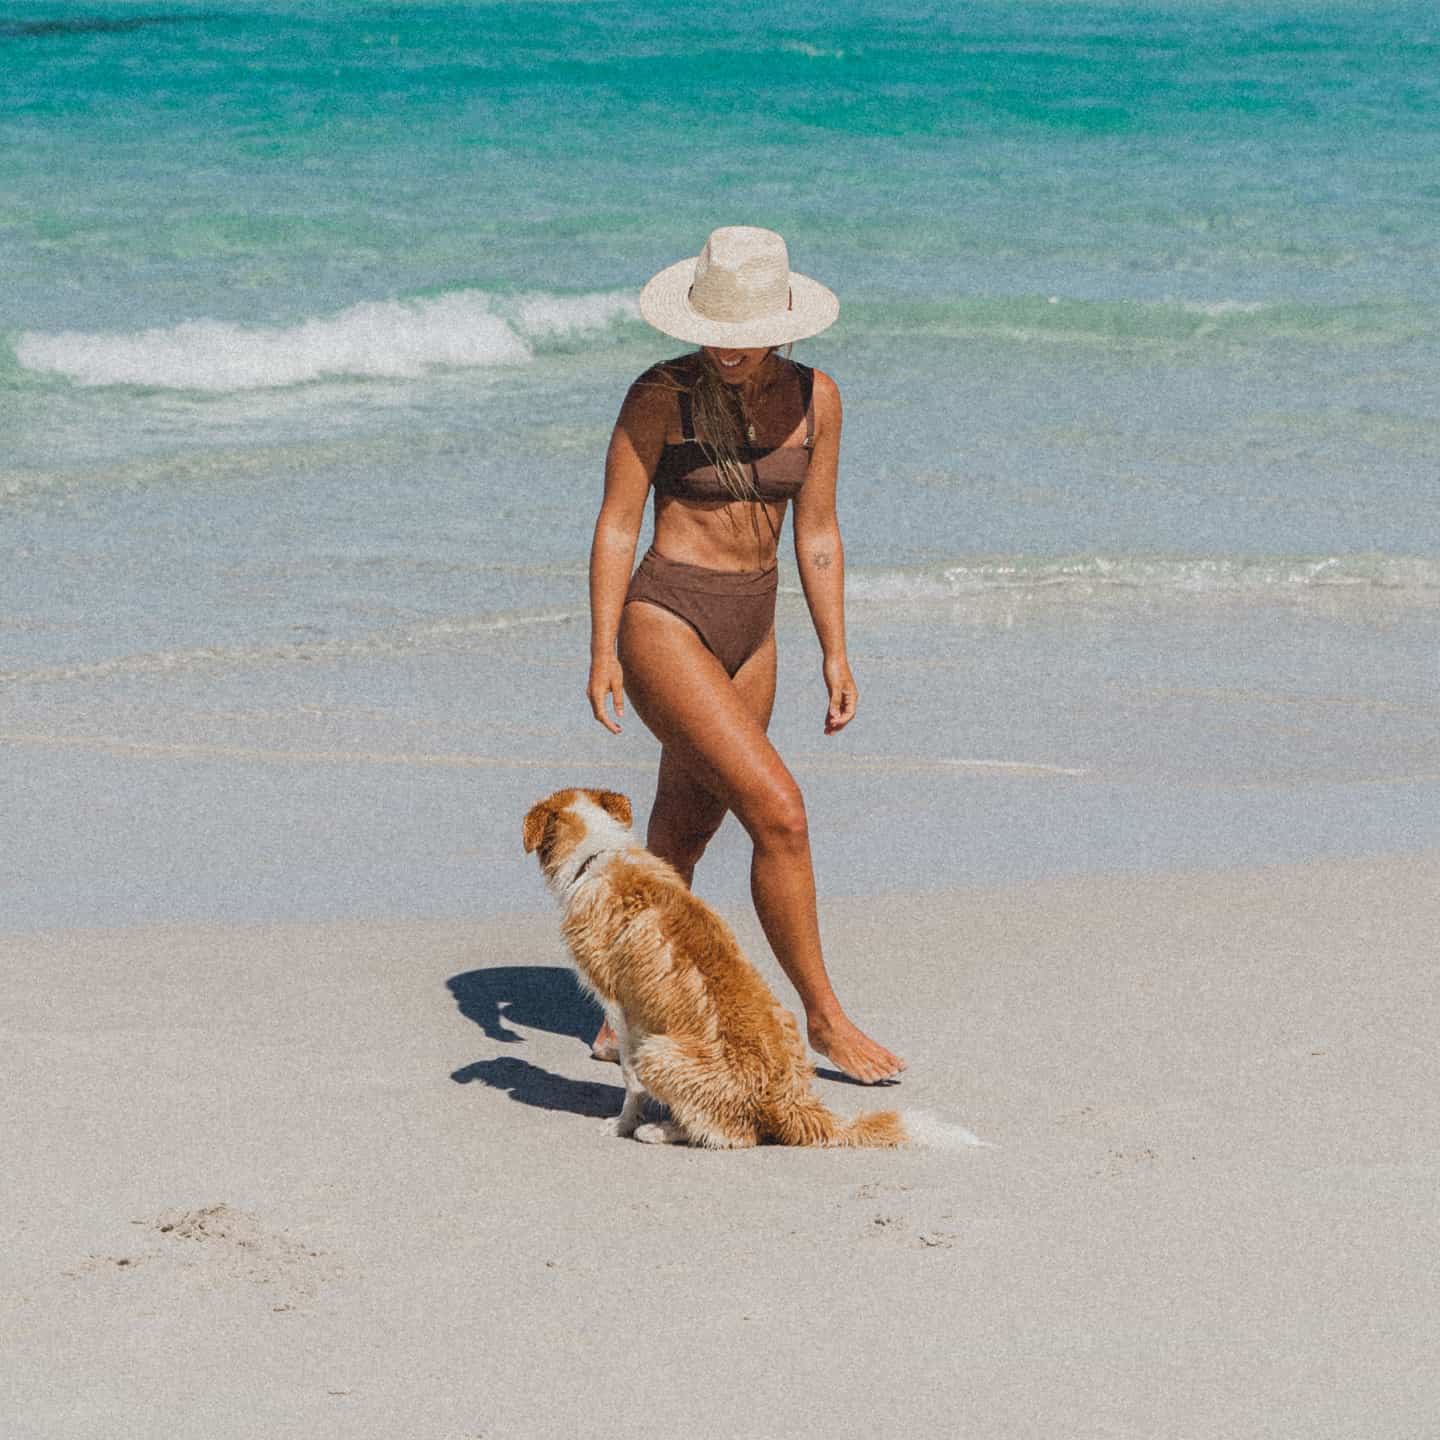 Kendall walking along the beach with her dog